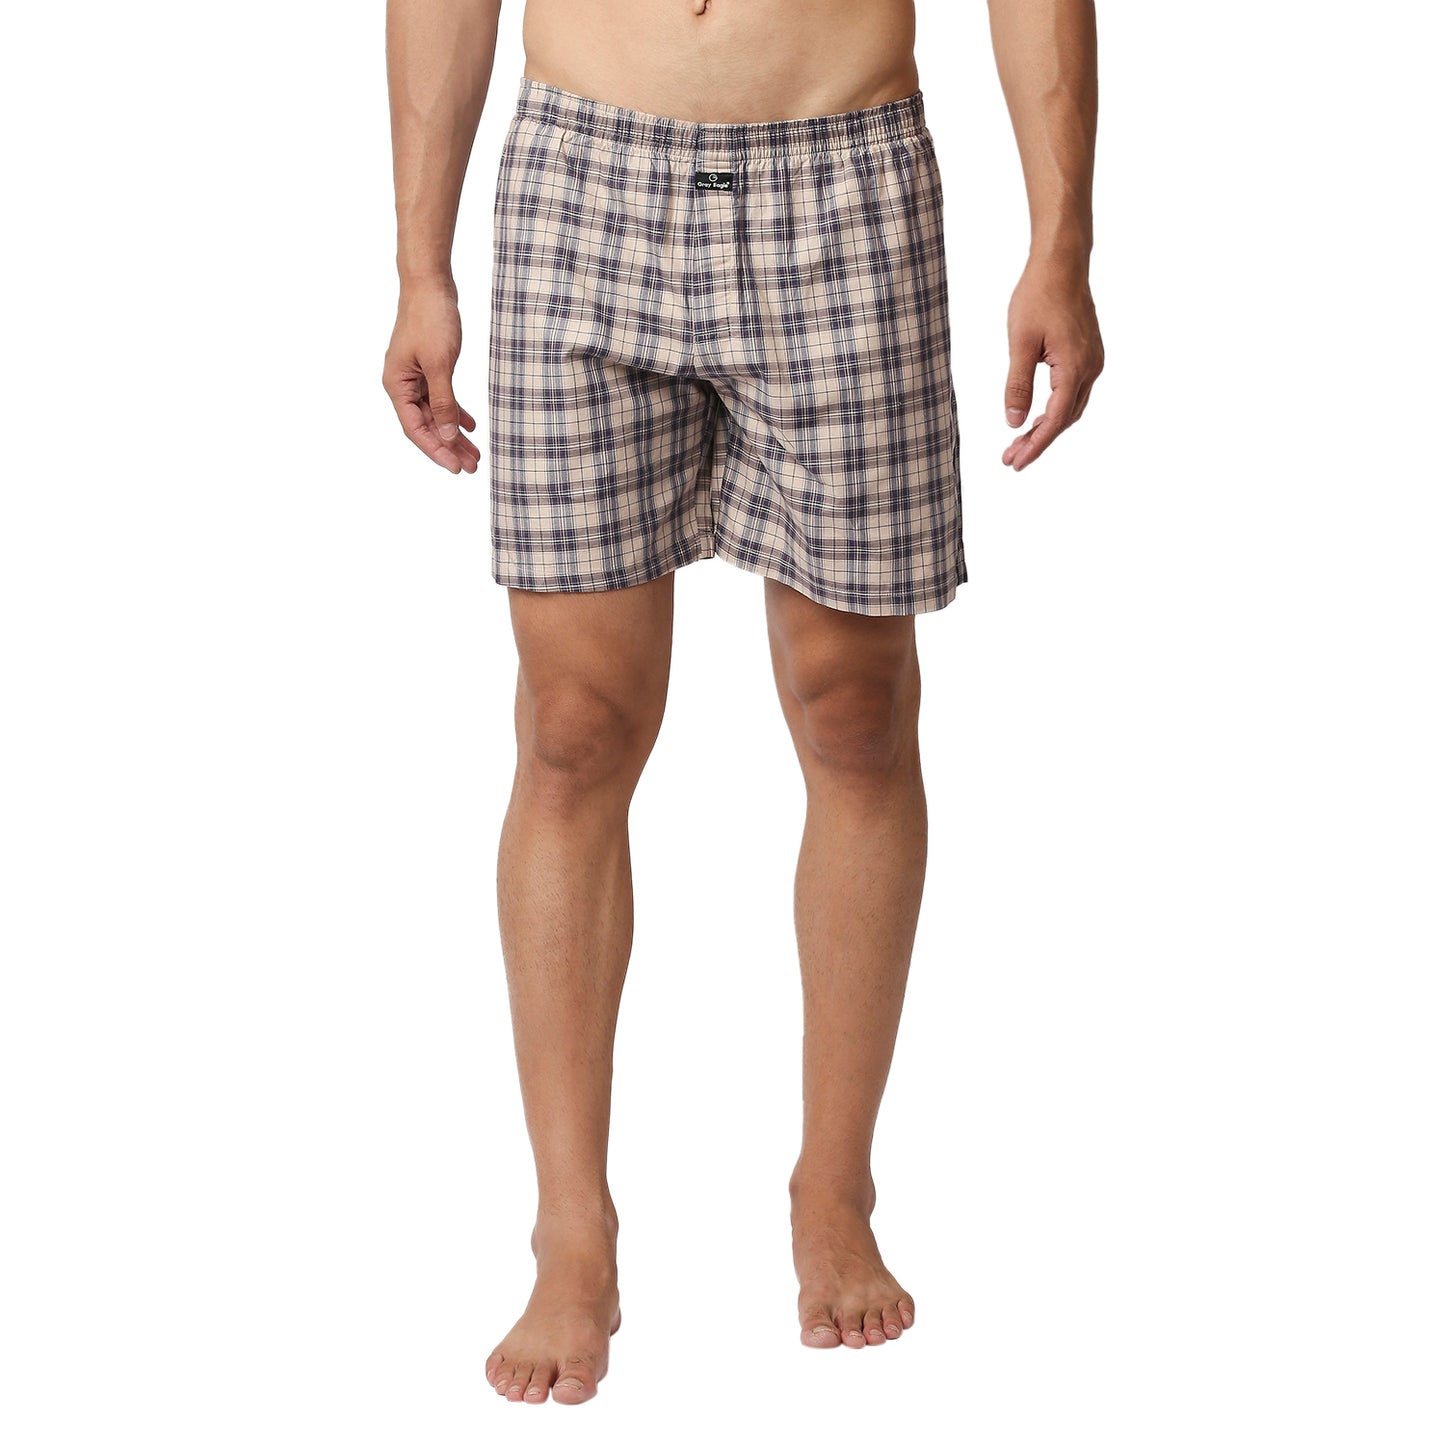 Assorted Basic Boxers (Pack of 2)